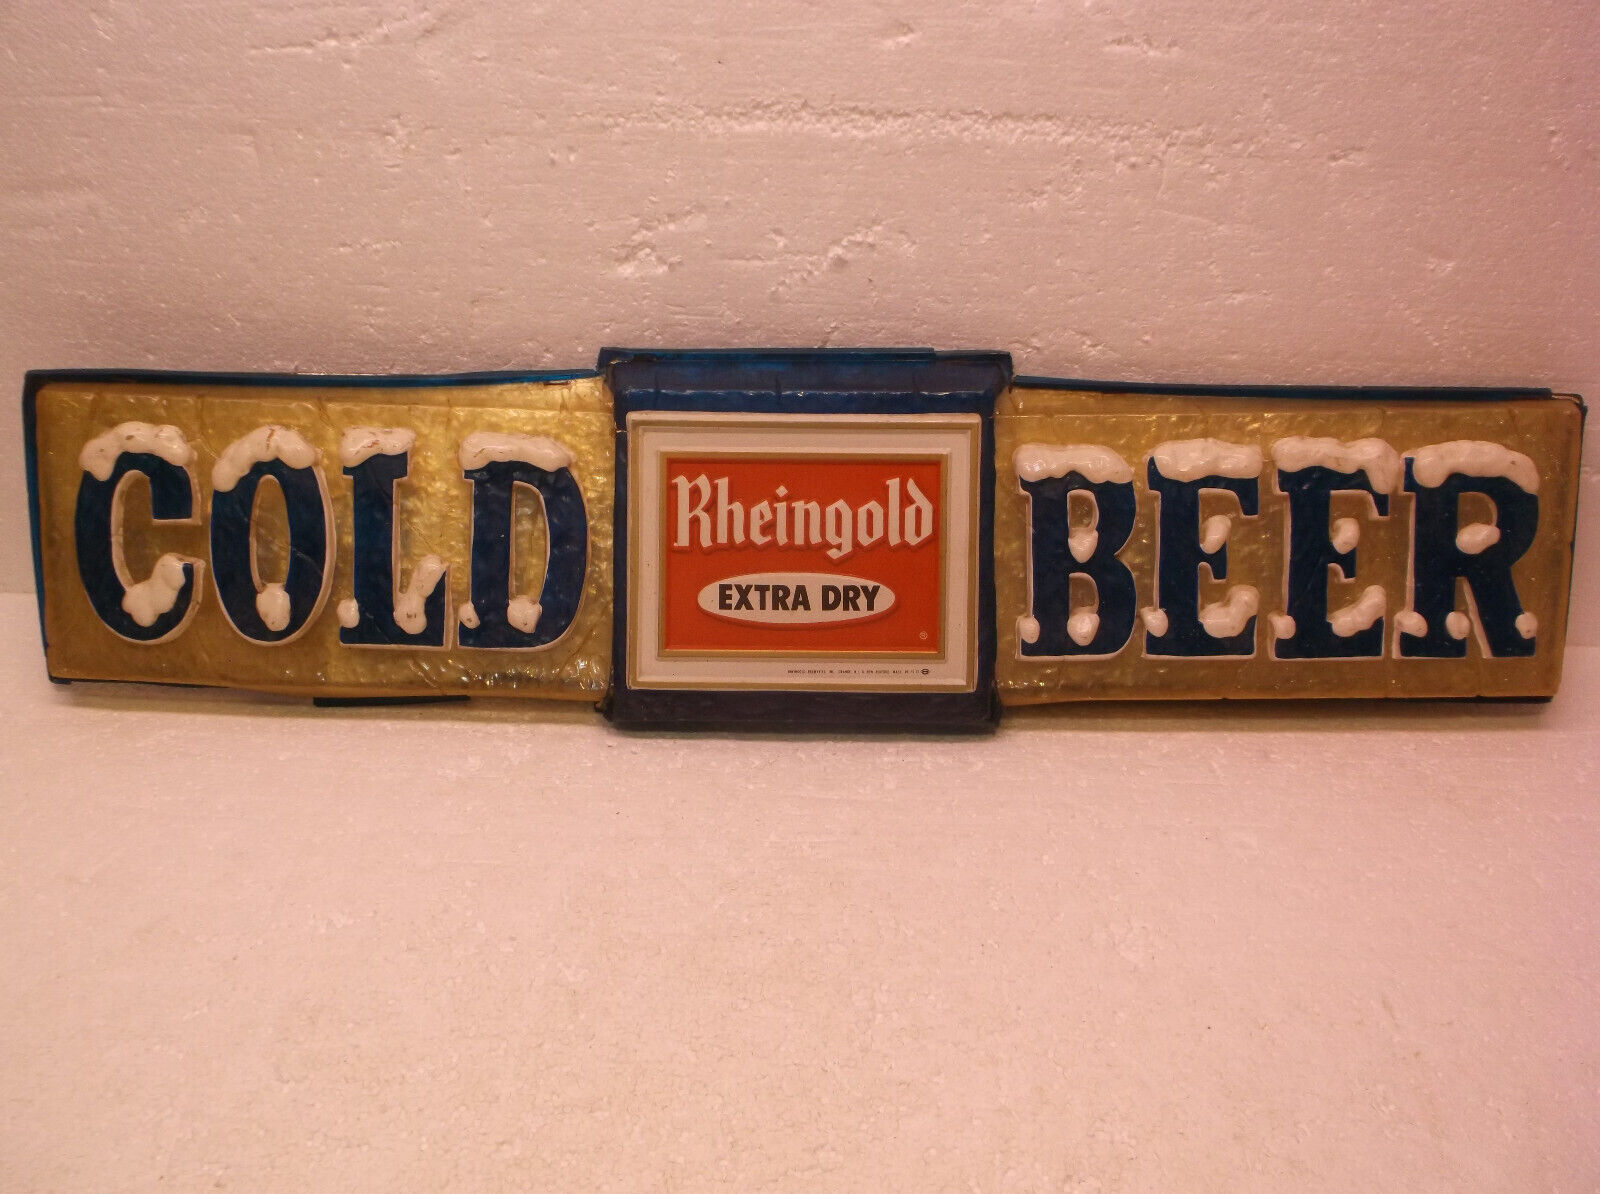 Vintage Rheingold Beer Sign 33 x 10 inches